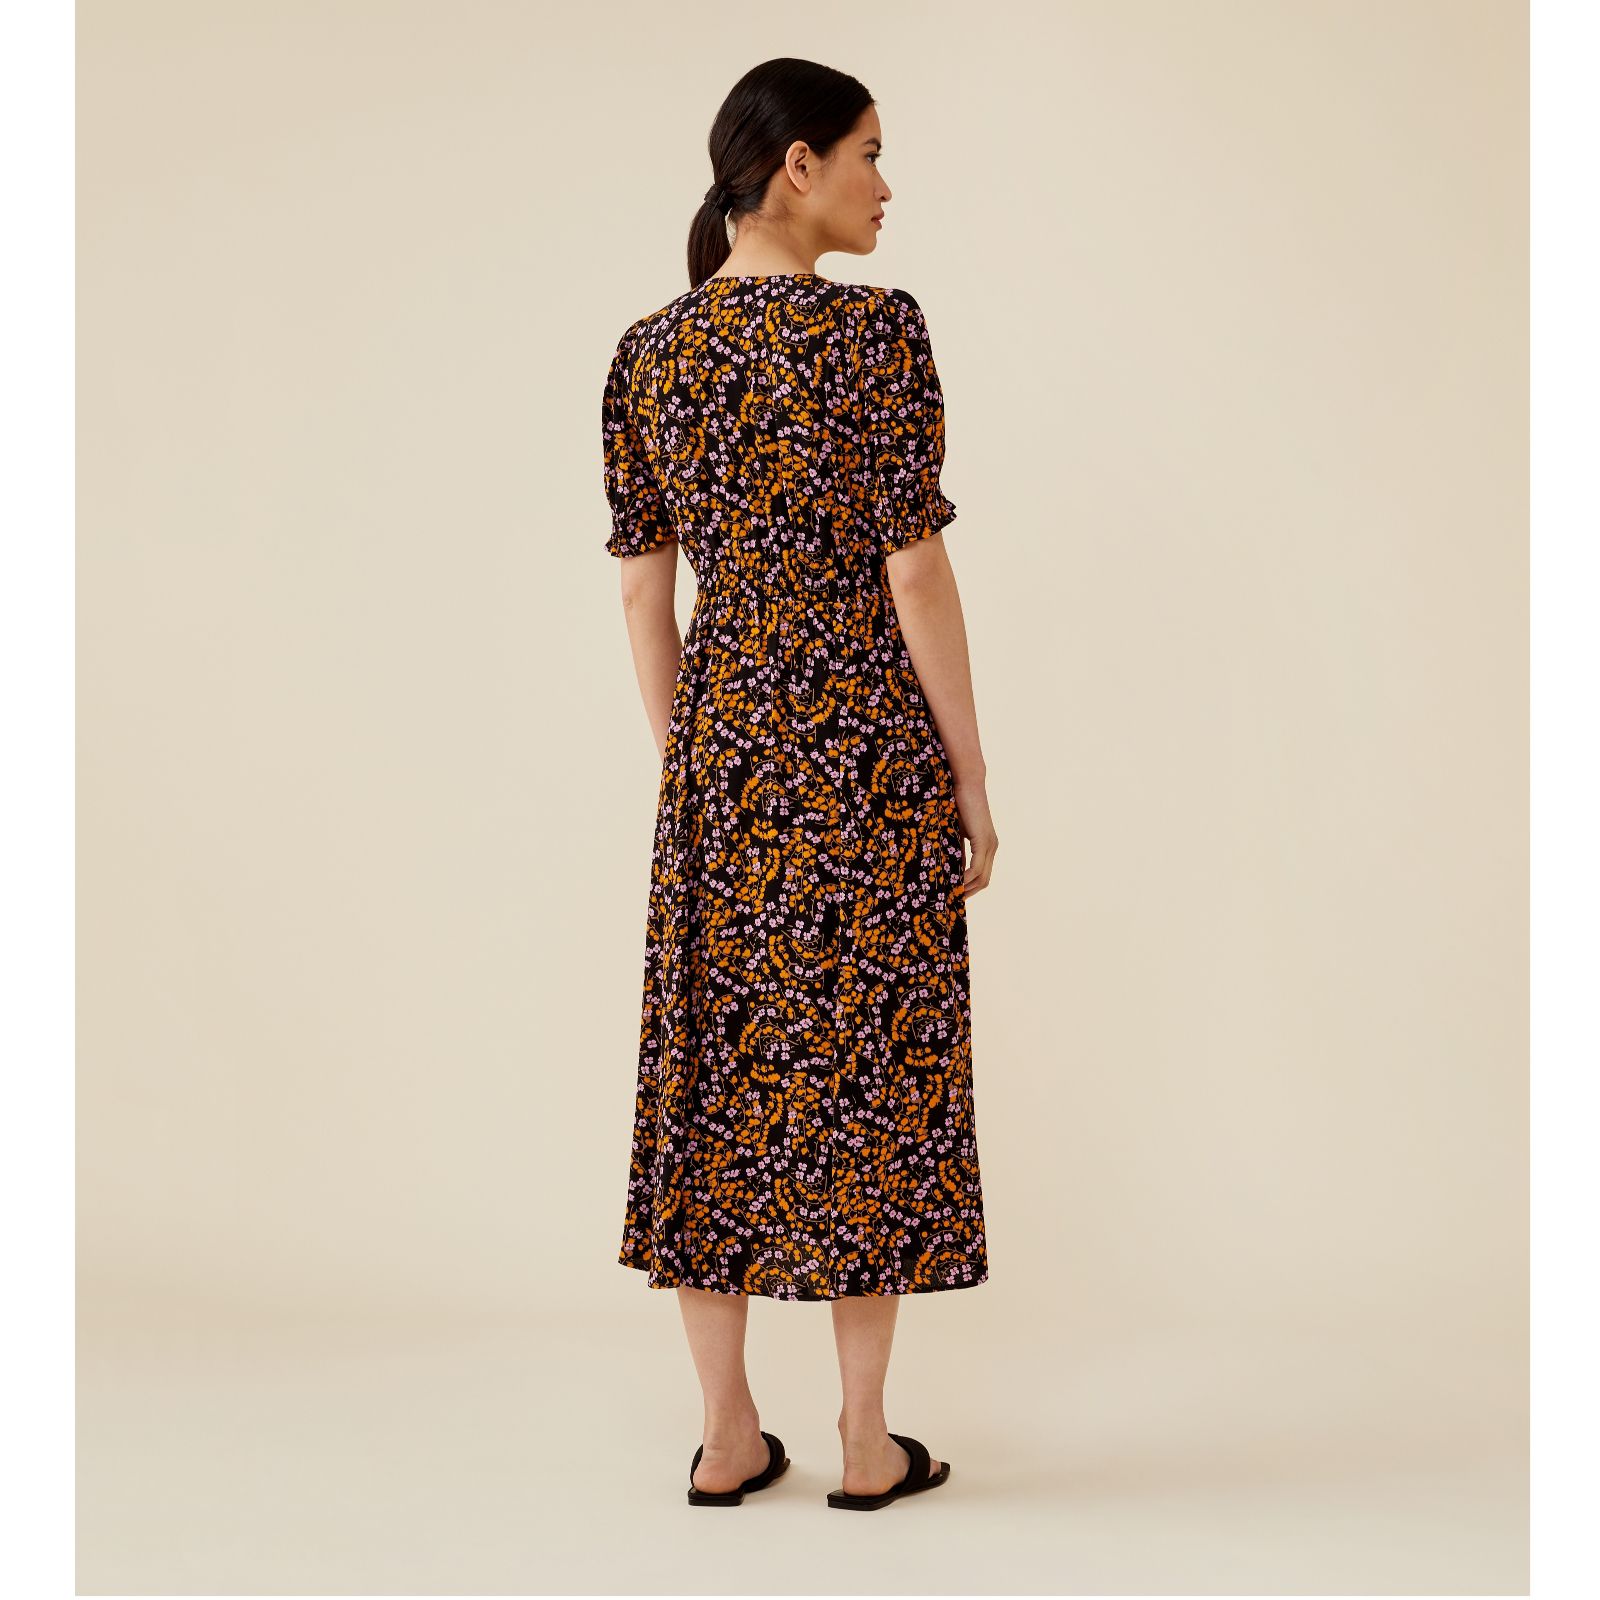 Finery River Printed Floral Dress - QVC UK